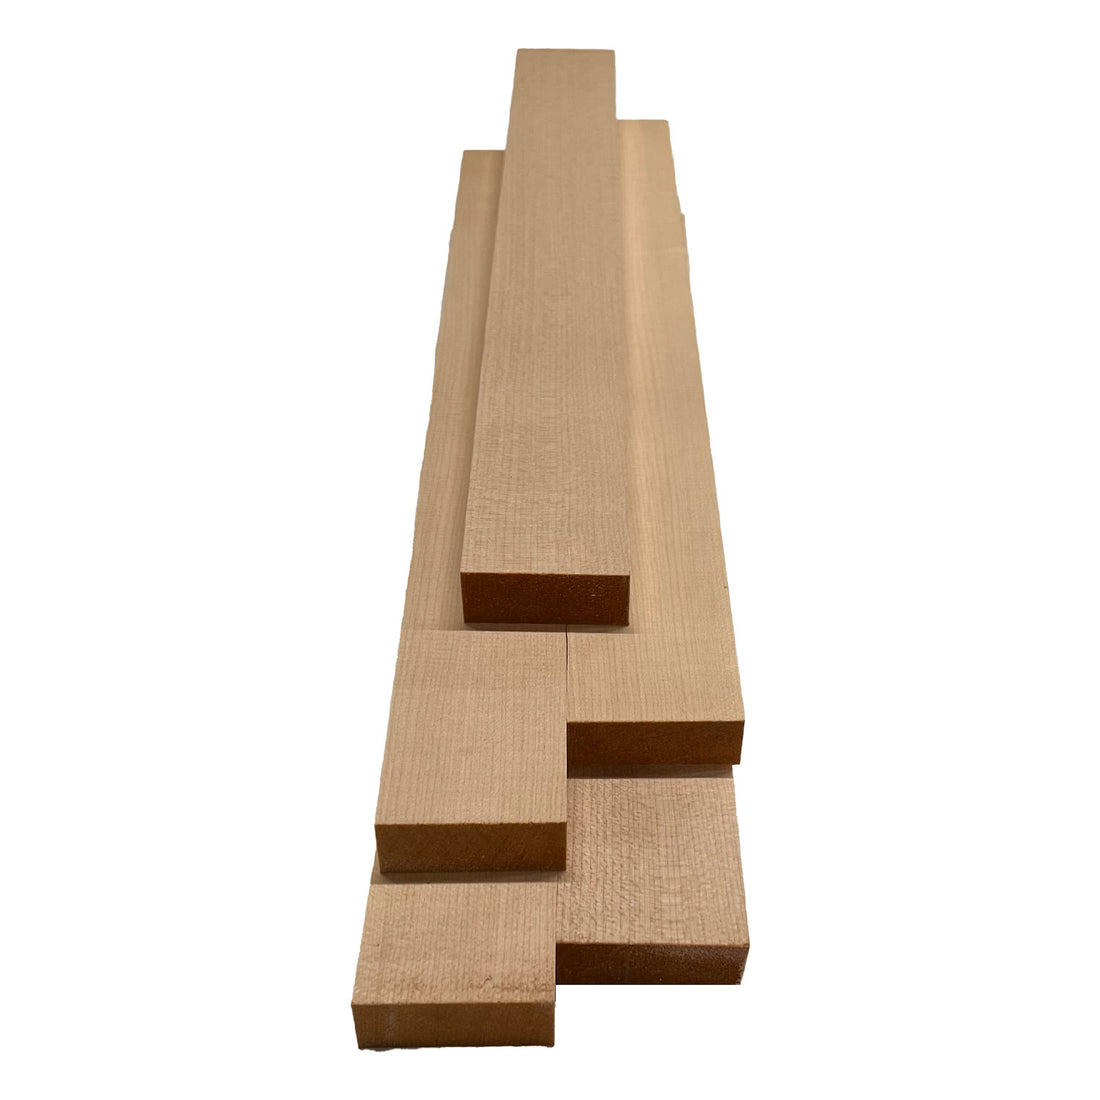 Pack of 5 ,Flame Hard Maple 3/4 Lumber Boards/Cutting Board Blocks - Exotic Wood Zone - Buy online Across USA 